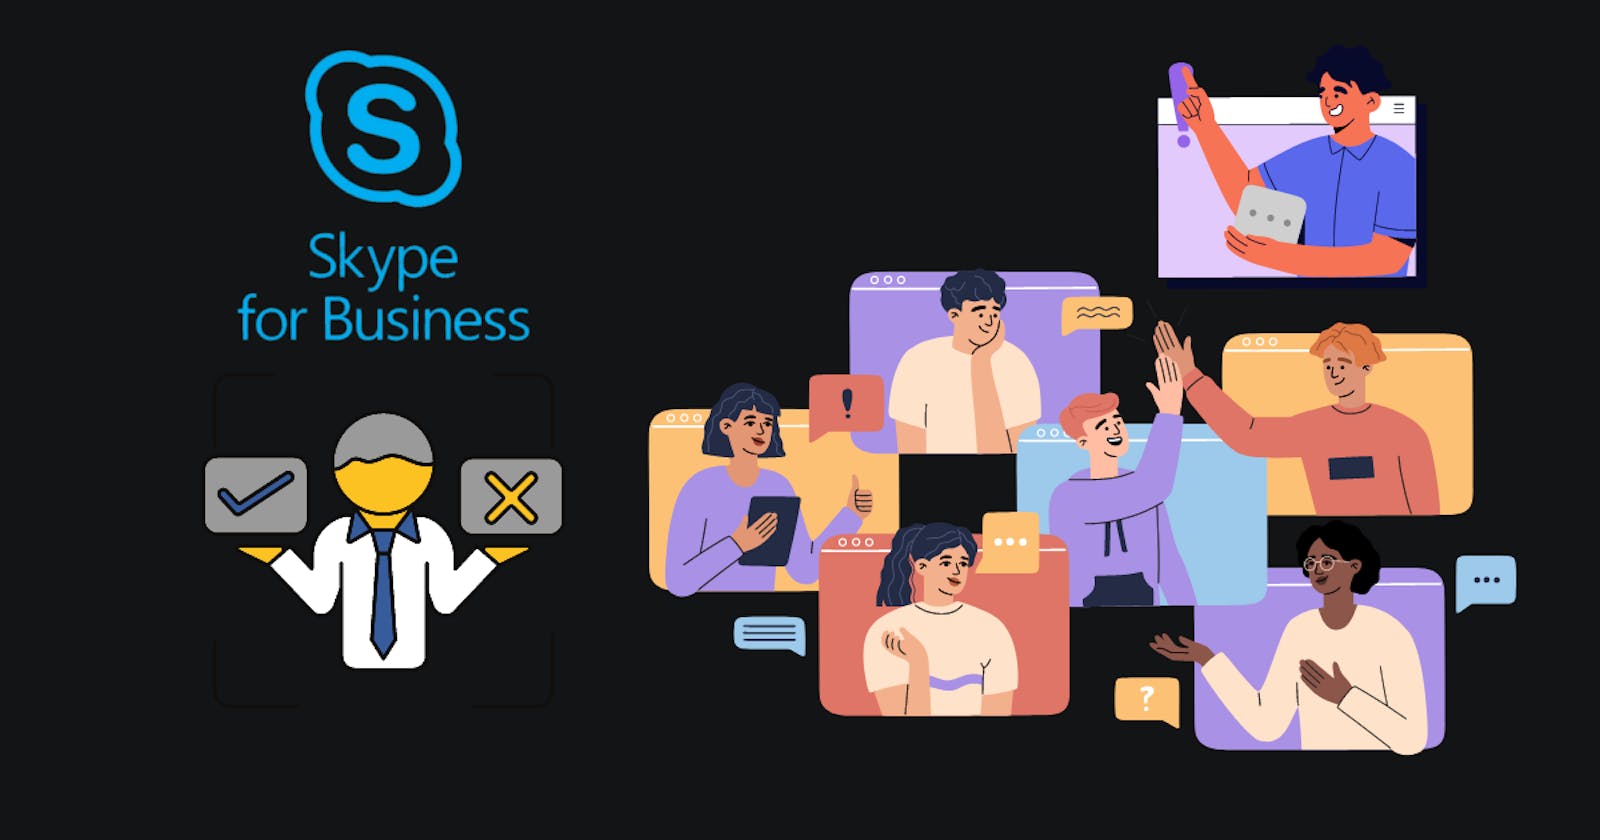 Why Skype for Business is Good for You